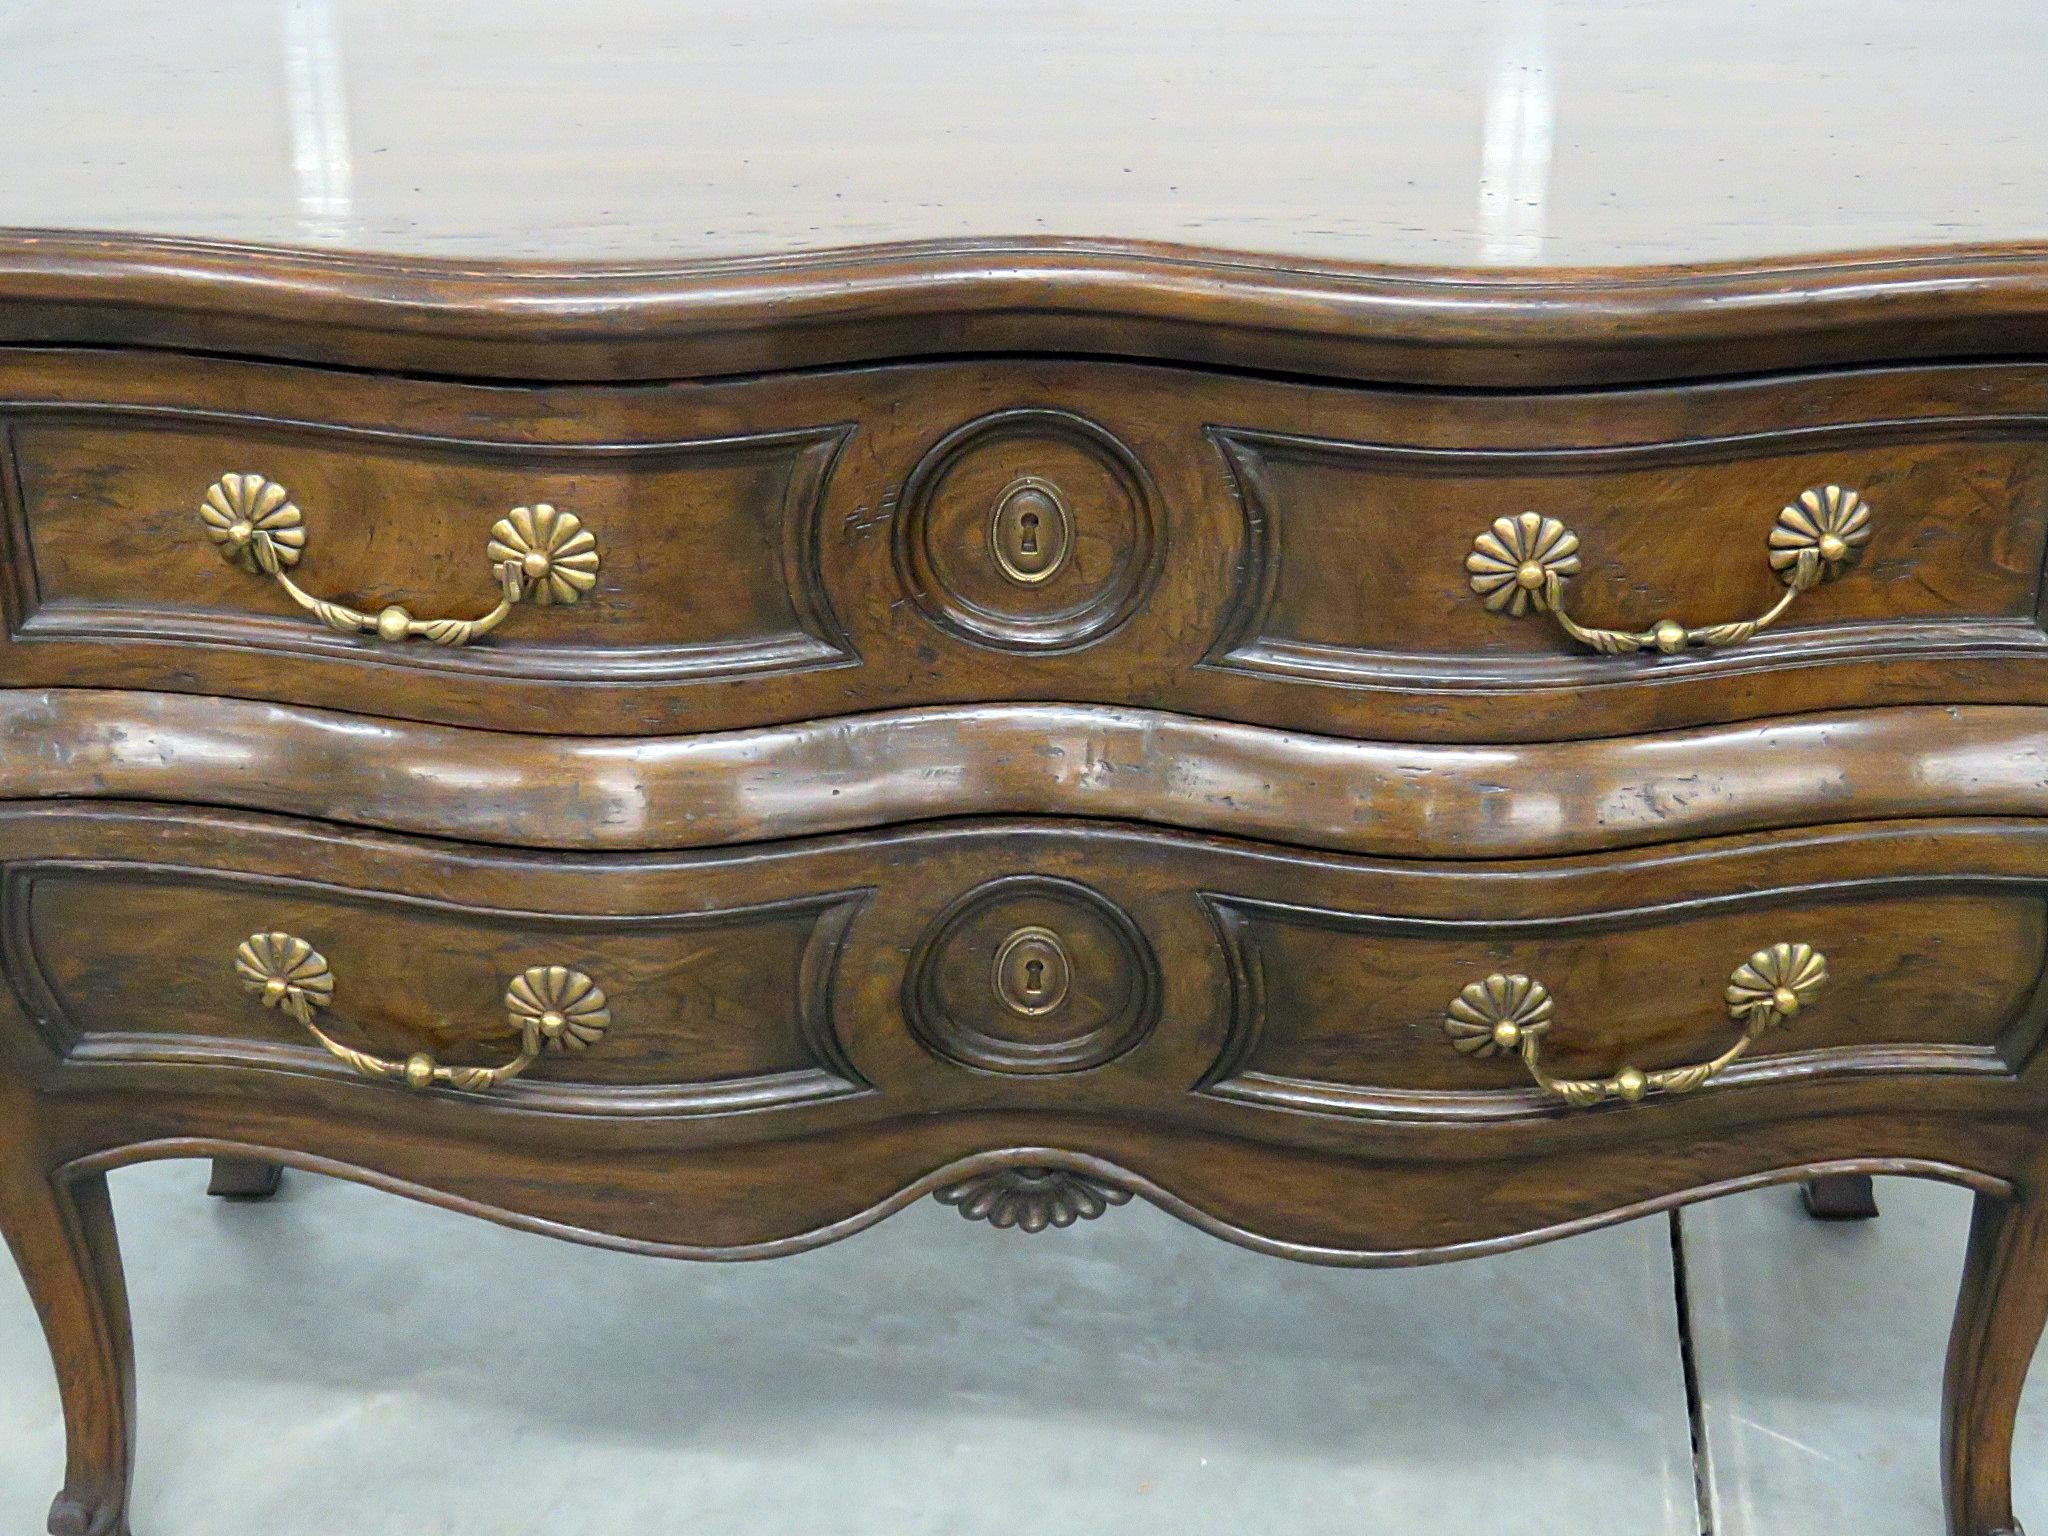 American Pair of Auffray Bombe Commodes